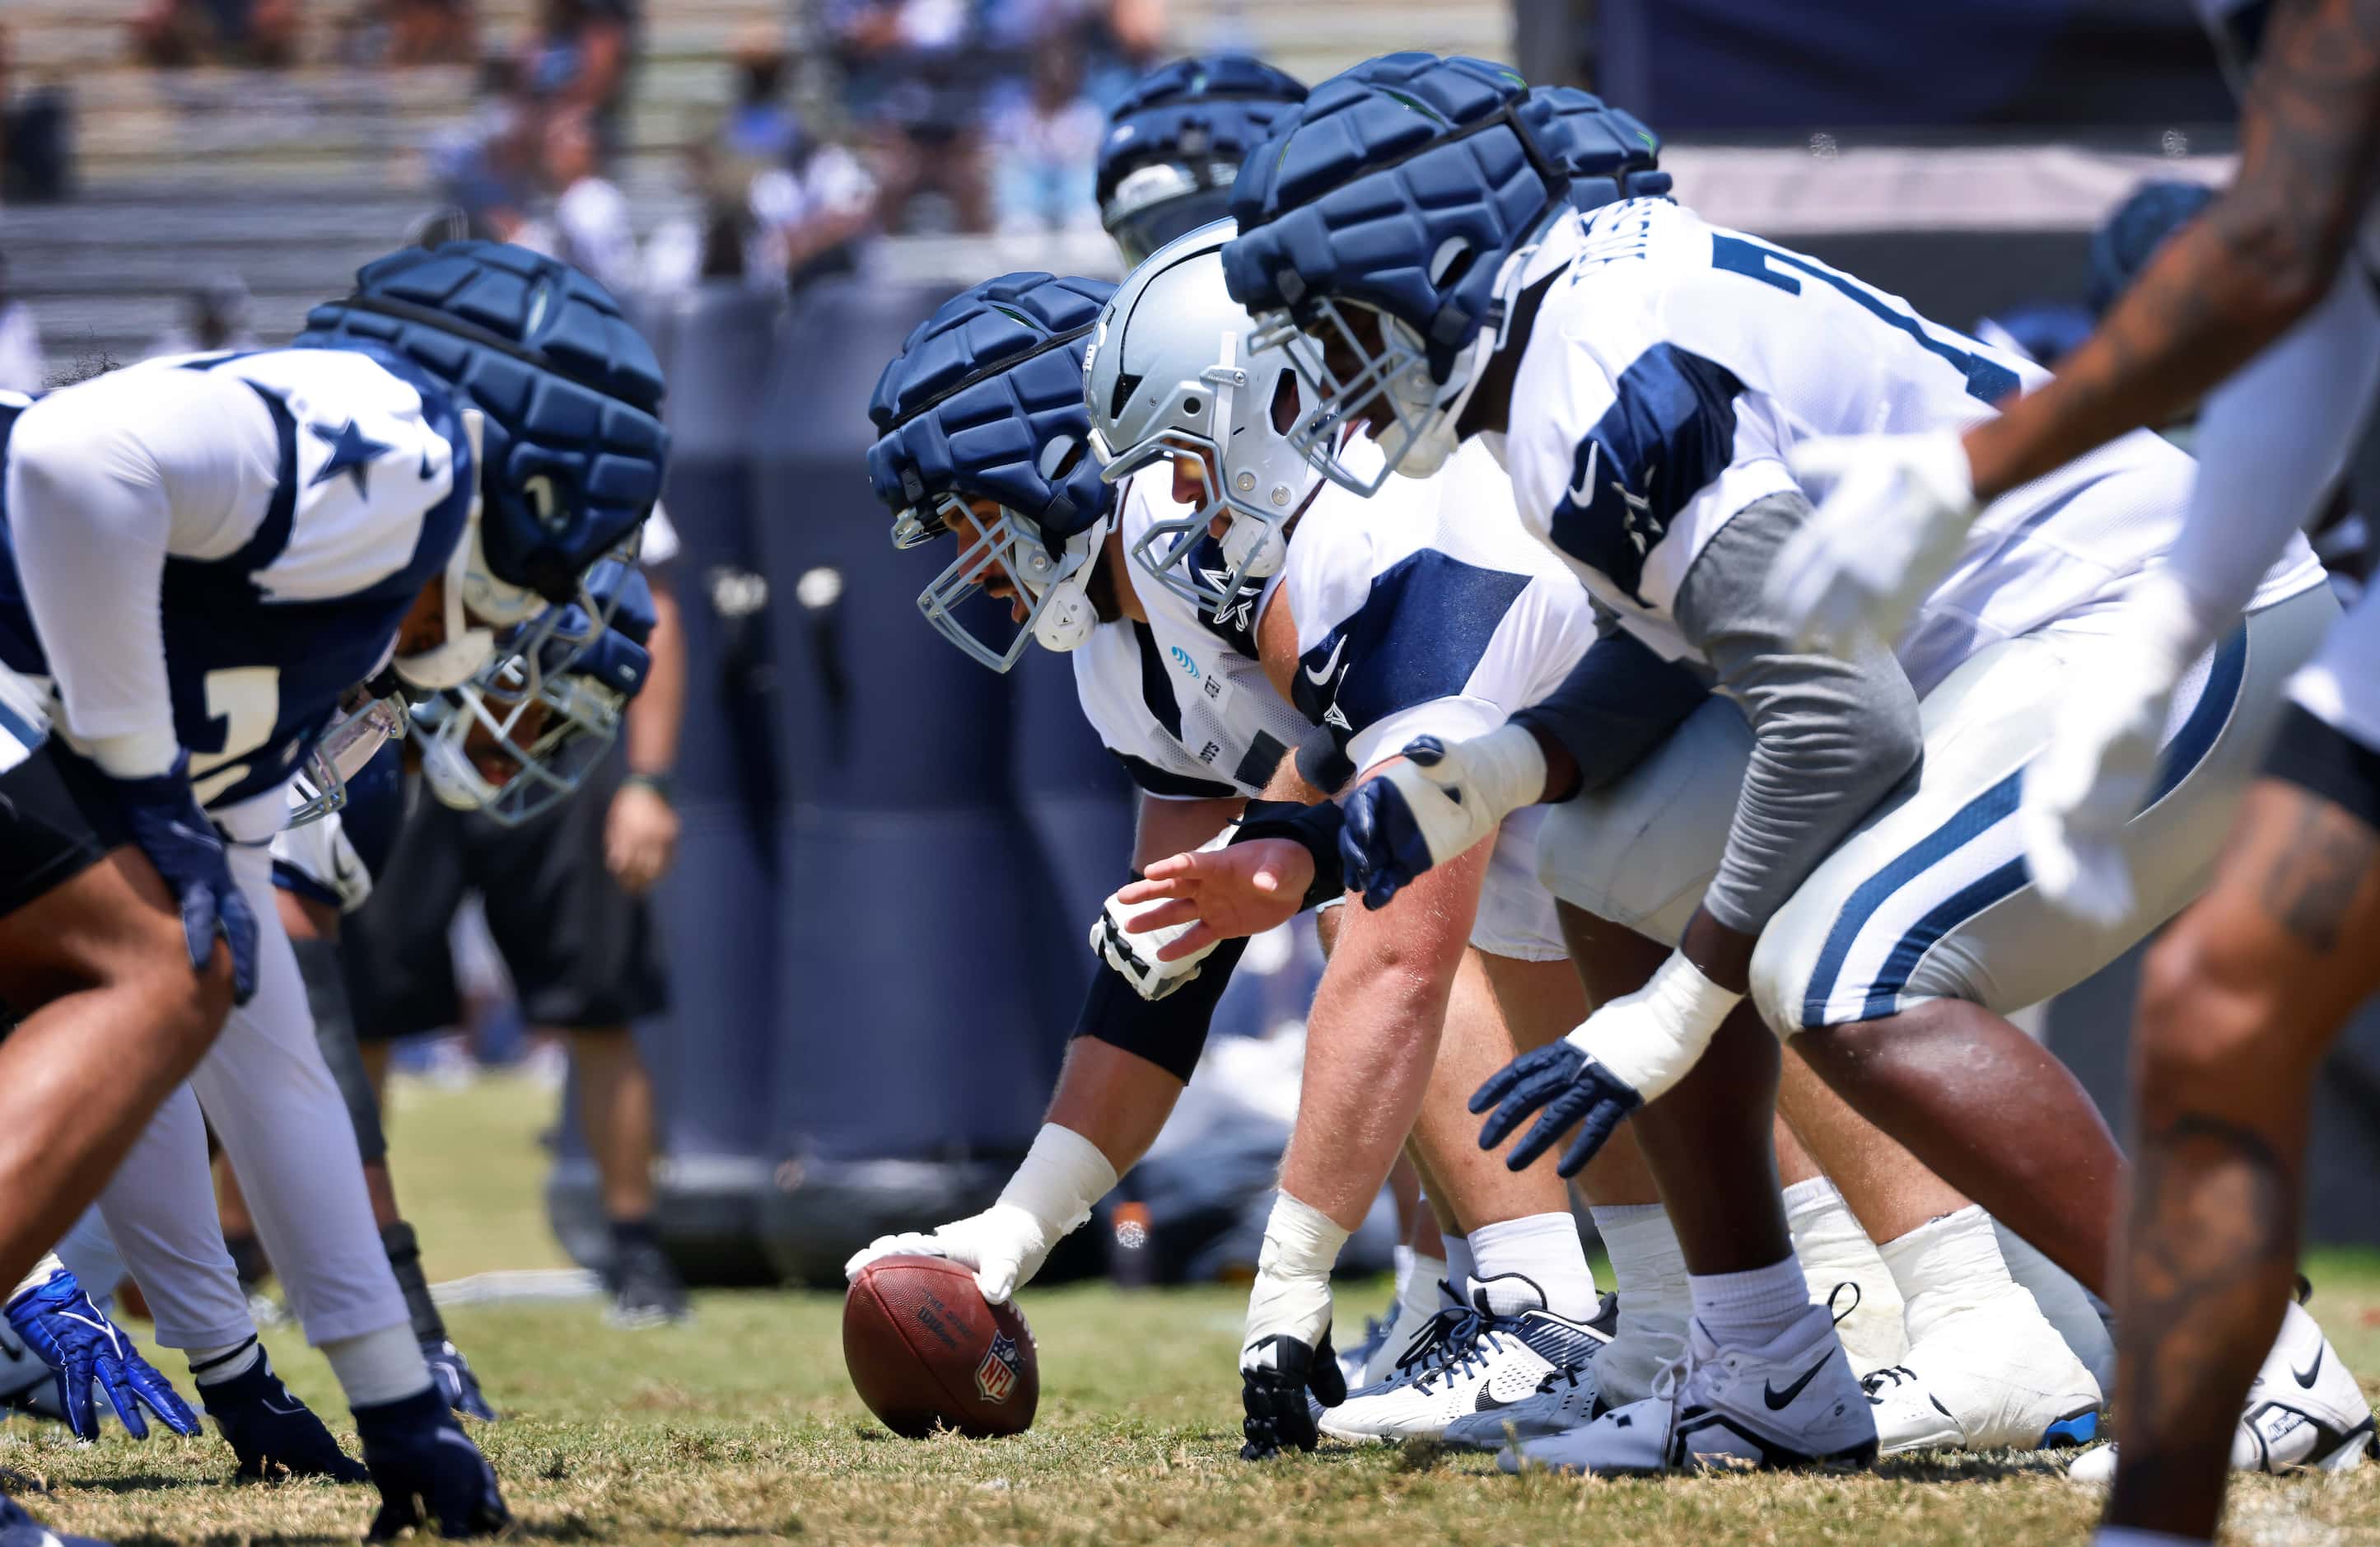 The Dallas Cowboys offensive line lines up against the defensive line during a training camp...